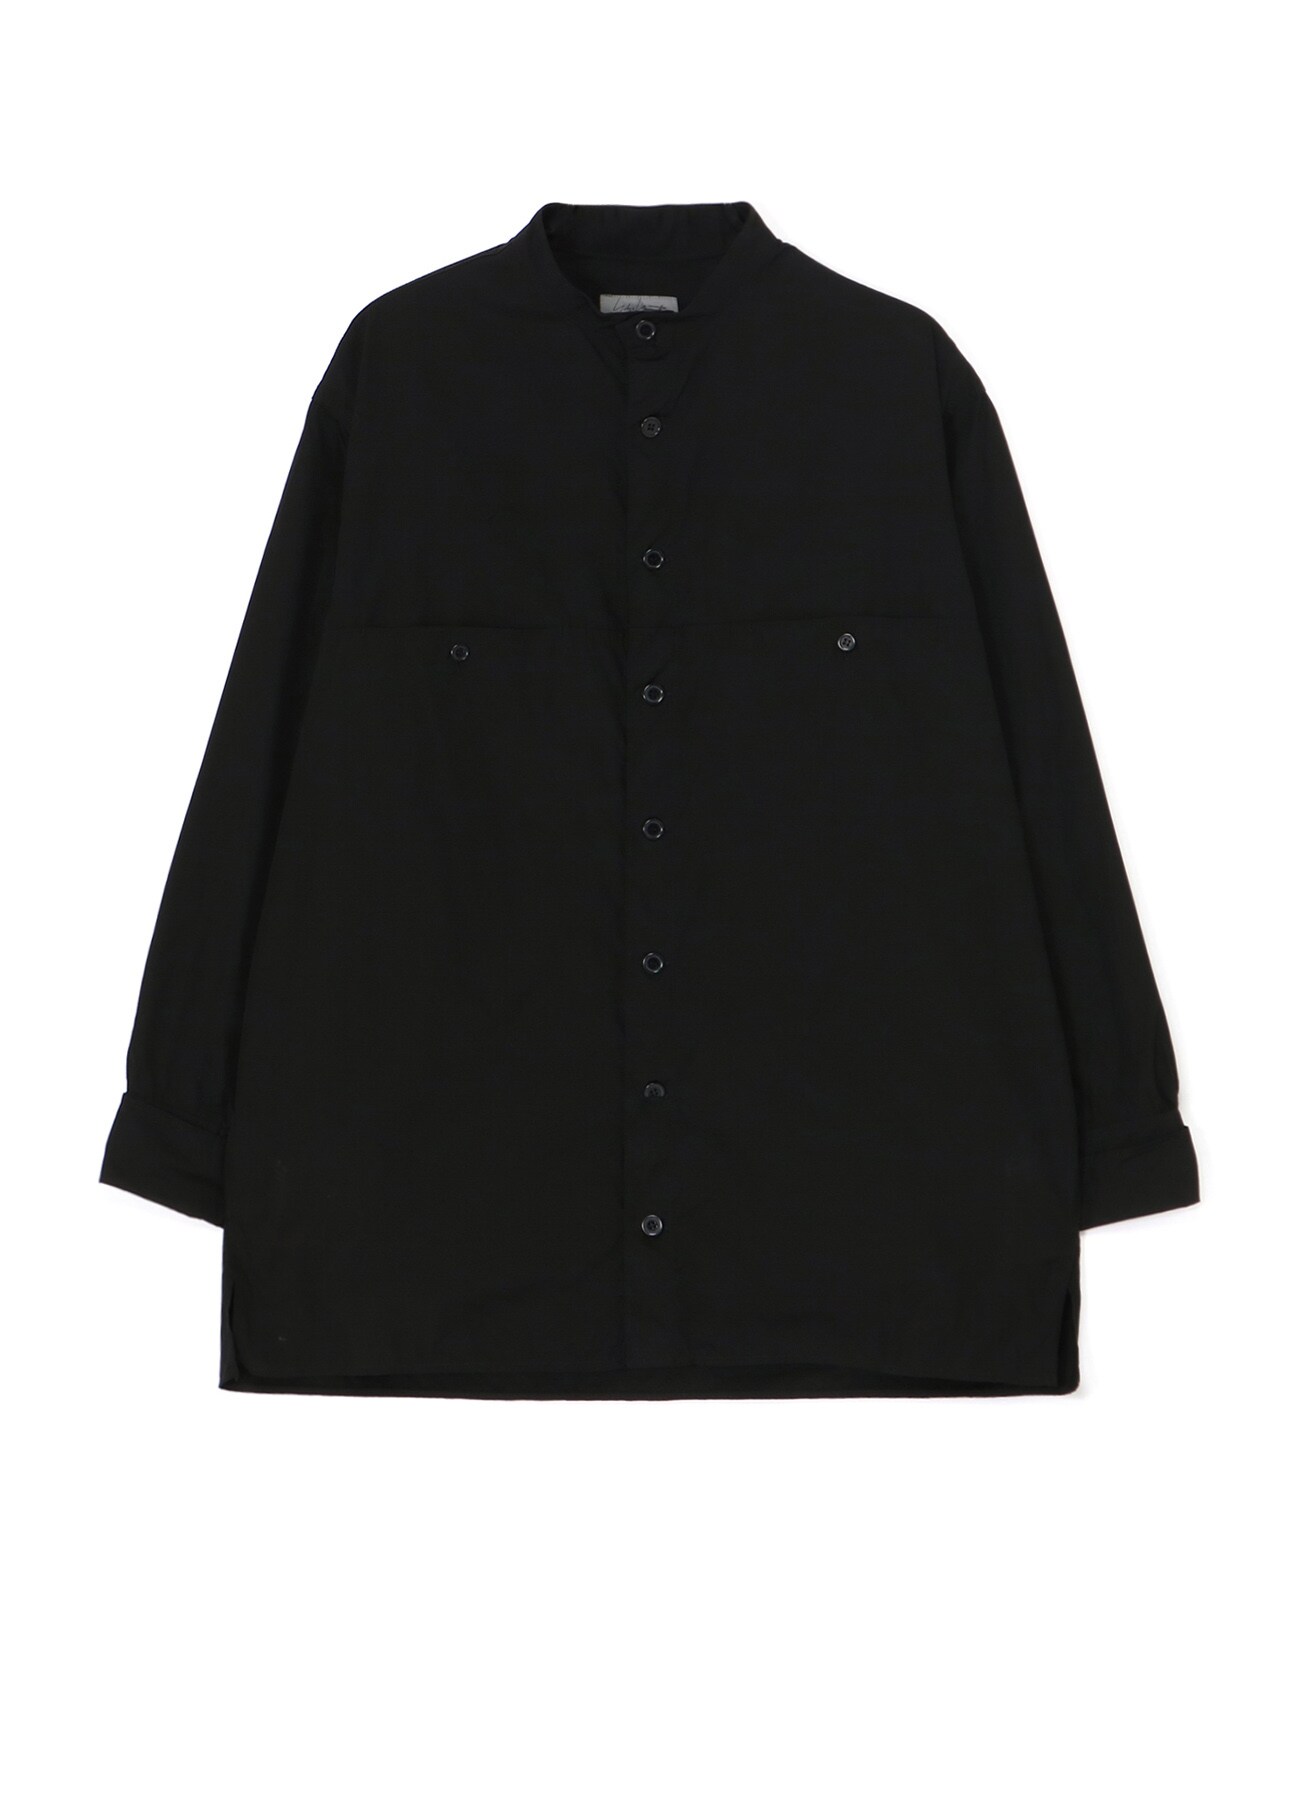 Vintage ｜ [Official mail order] THE SHOP YOHJI YAMAMOTO